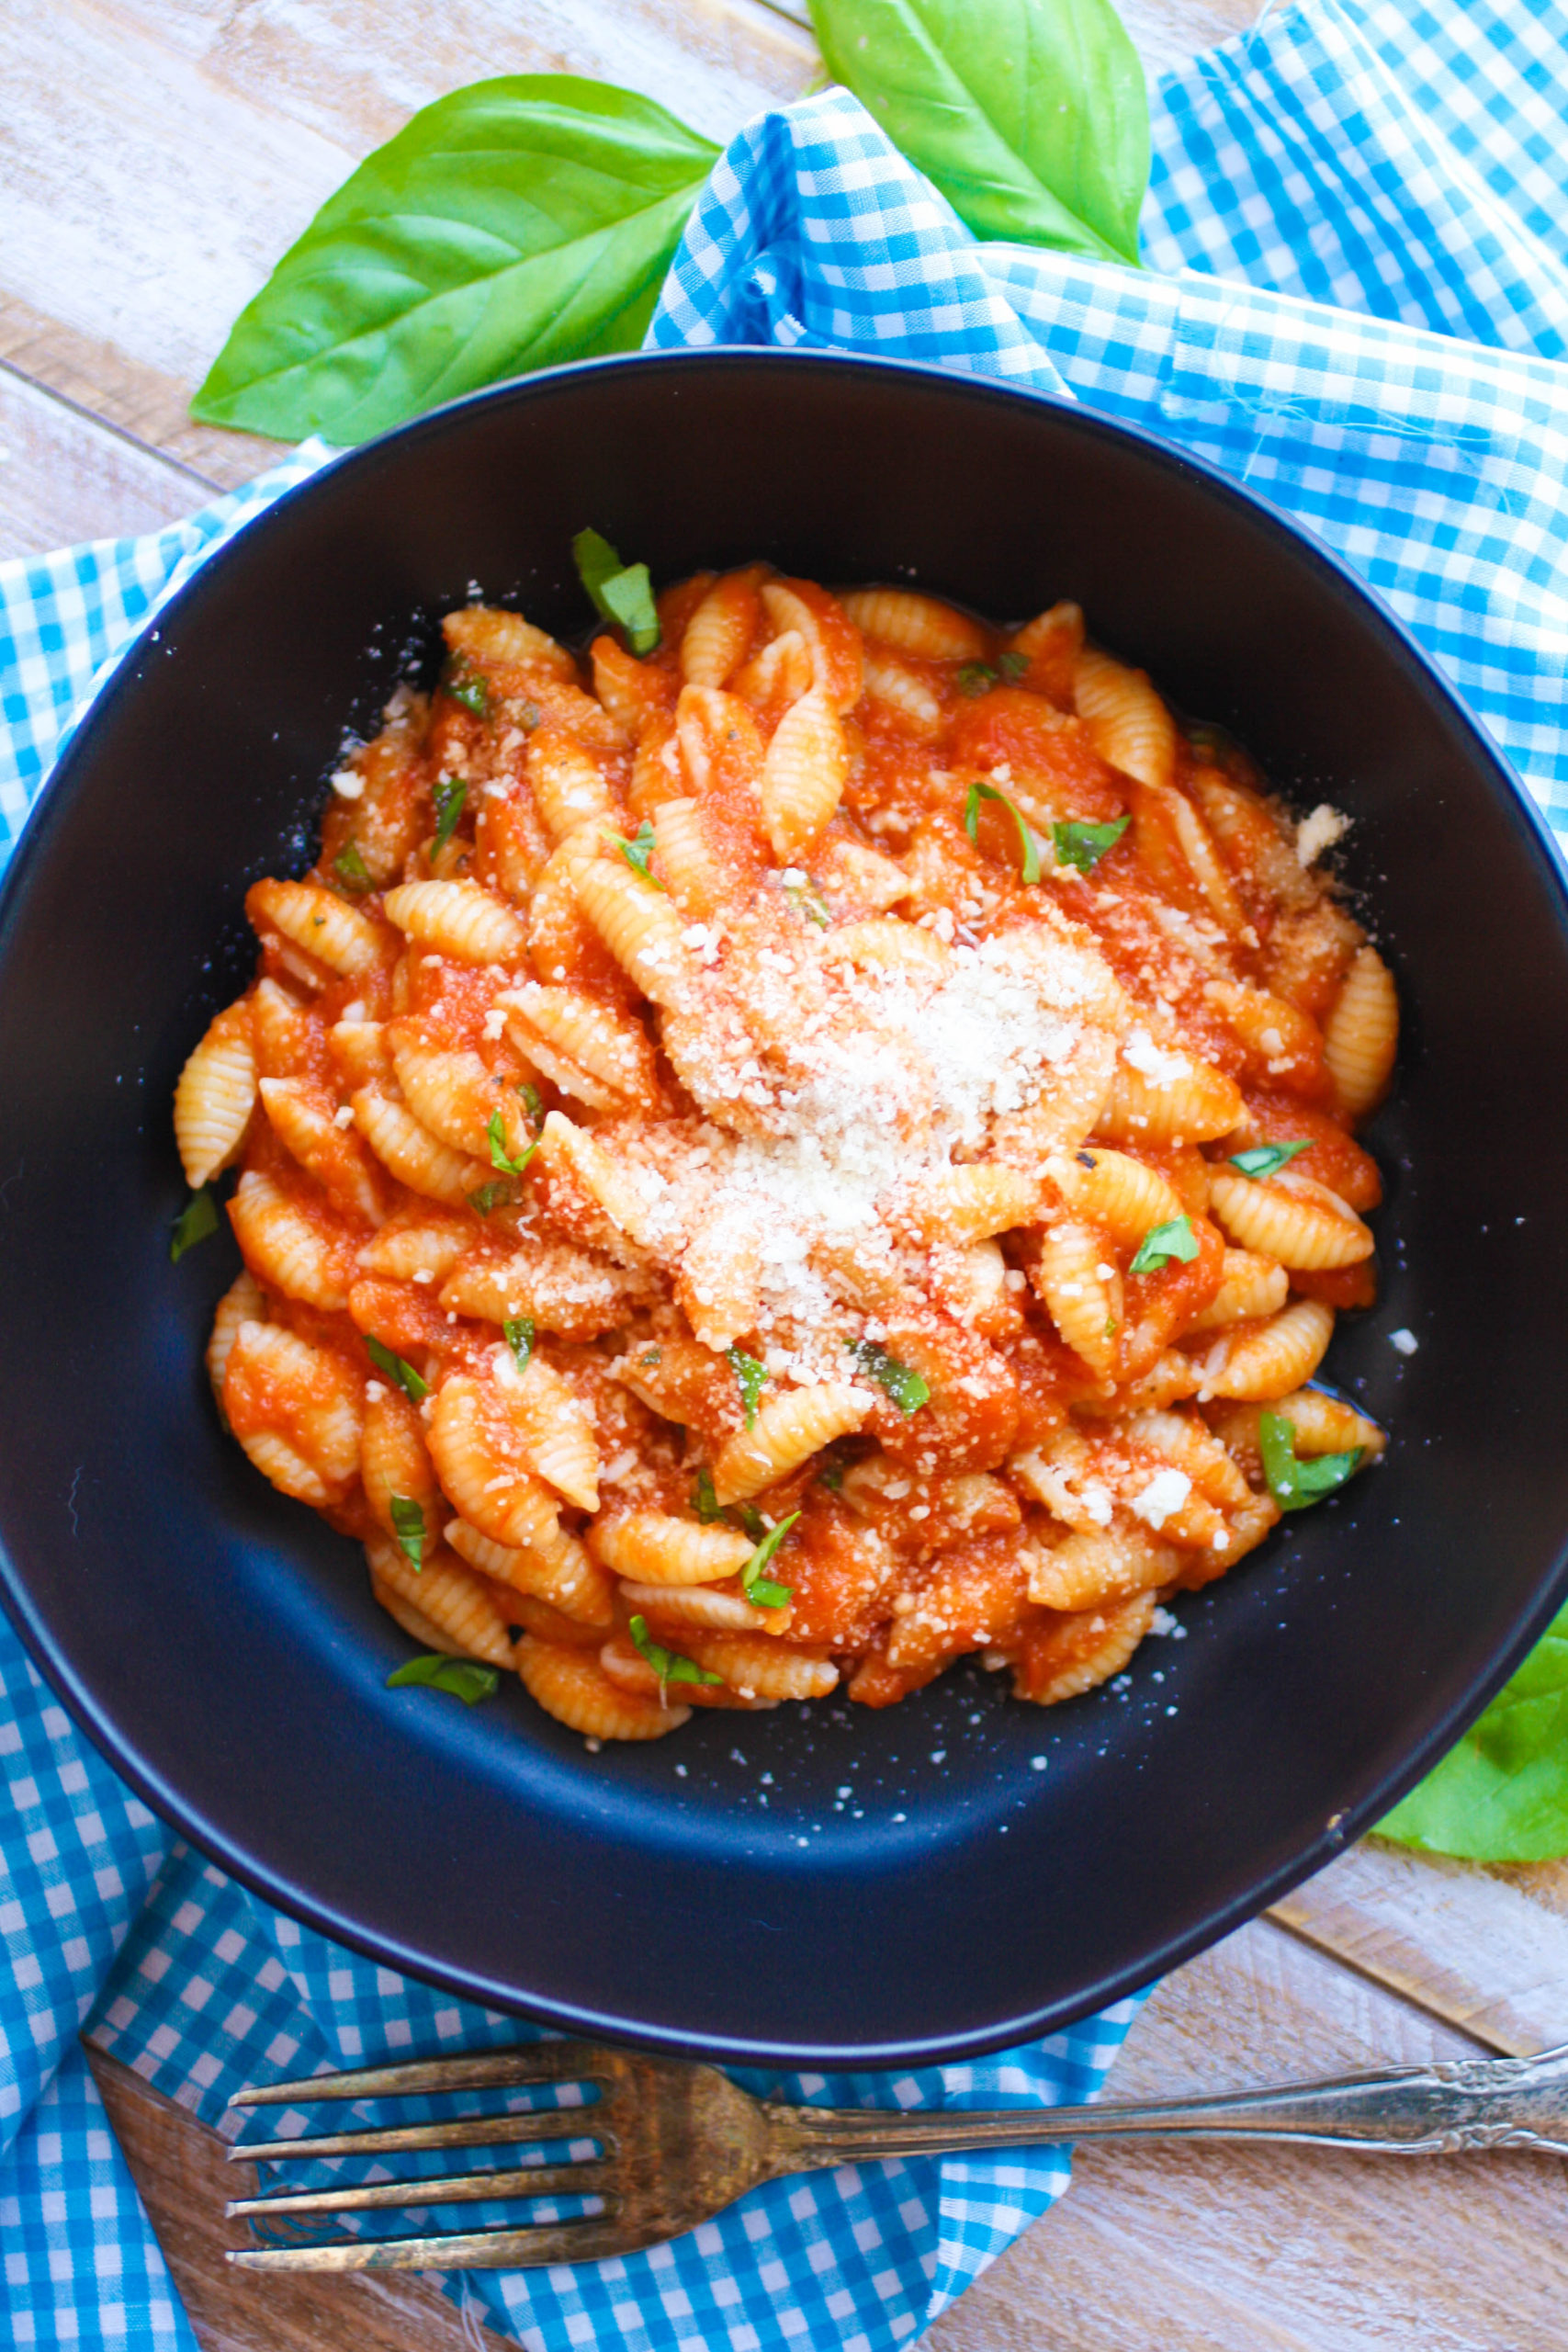 You'll love this easy homemade pasta sauce you can use with your favorite meal!